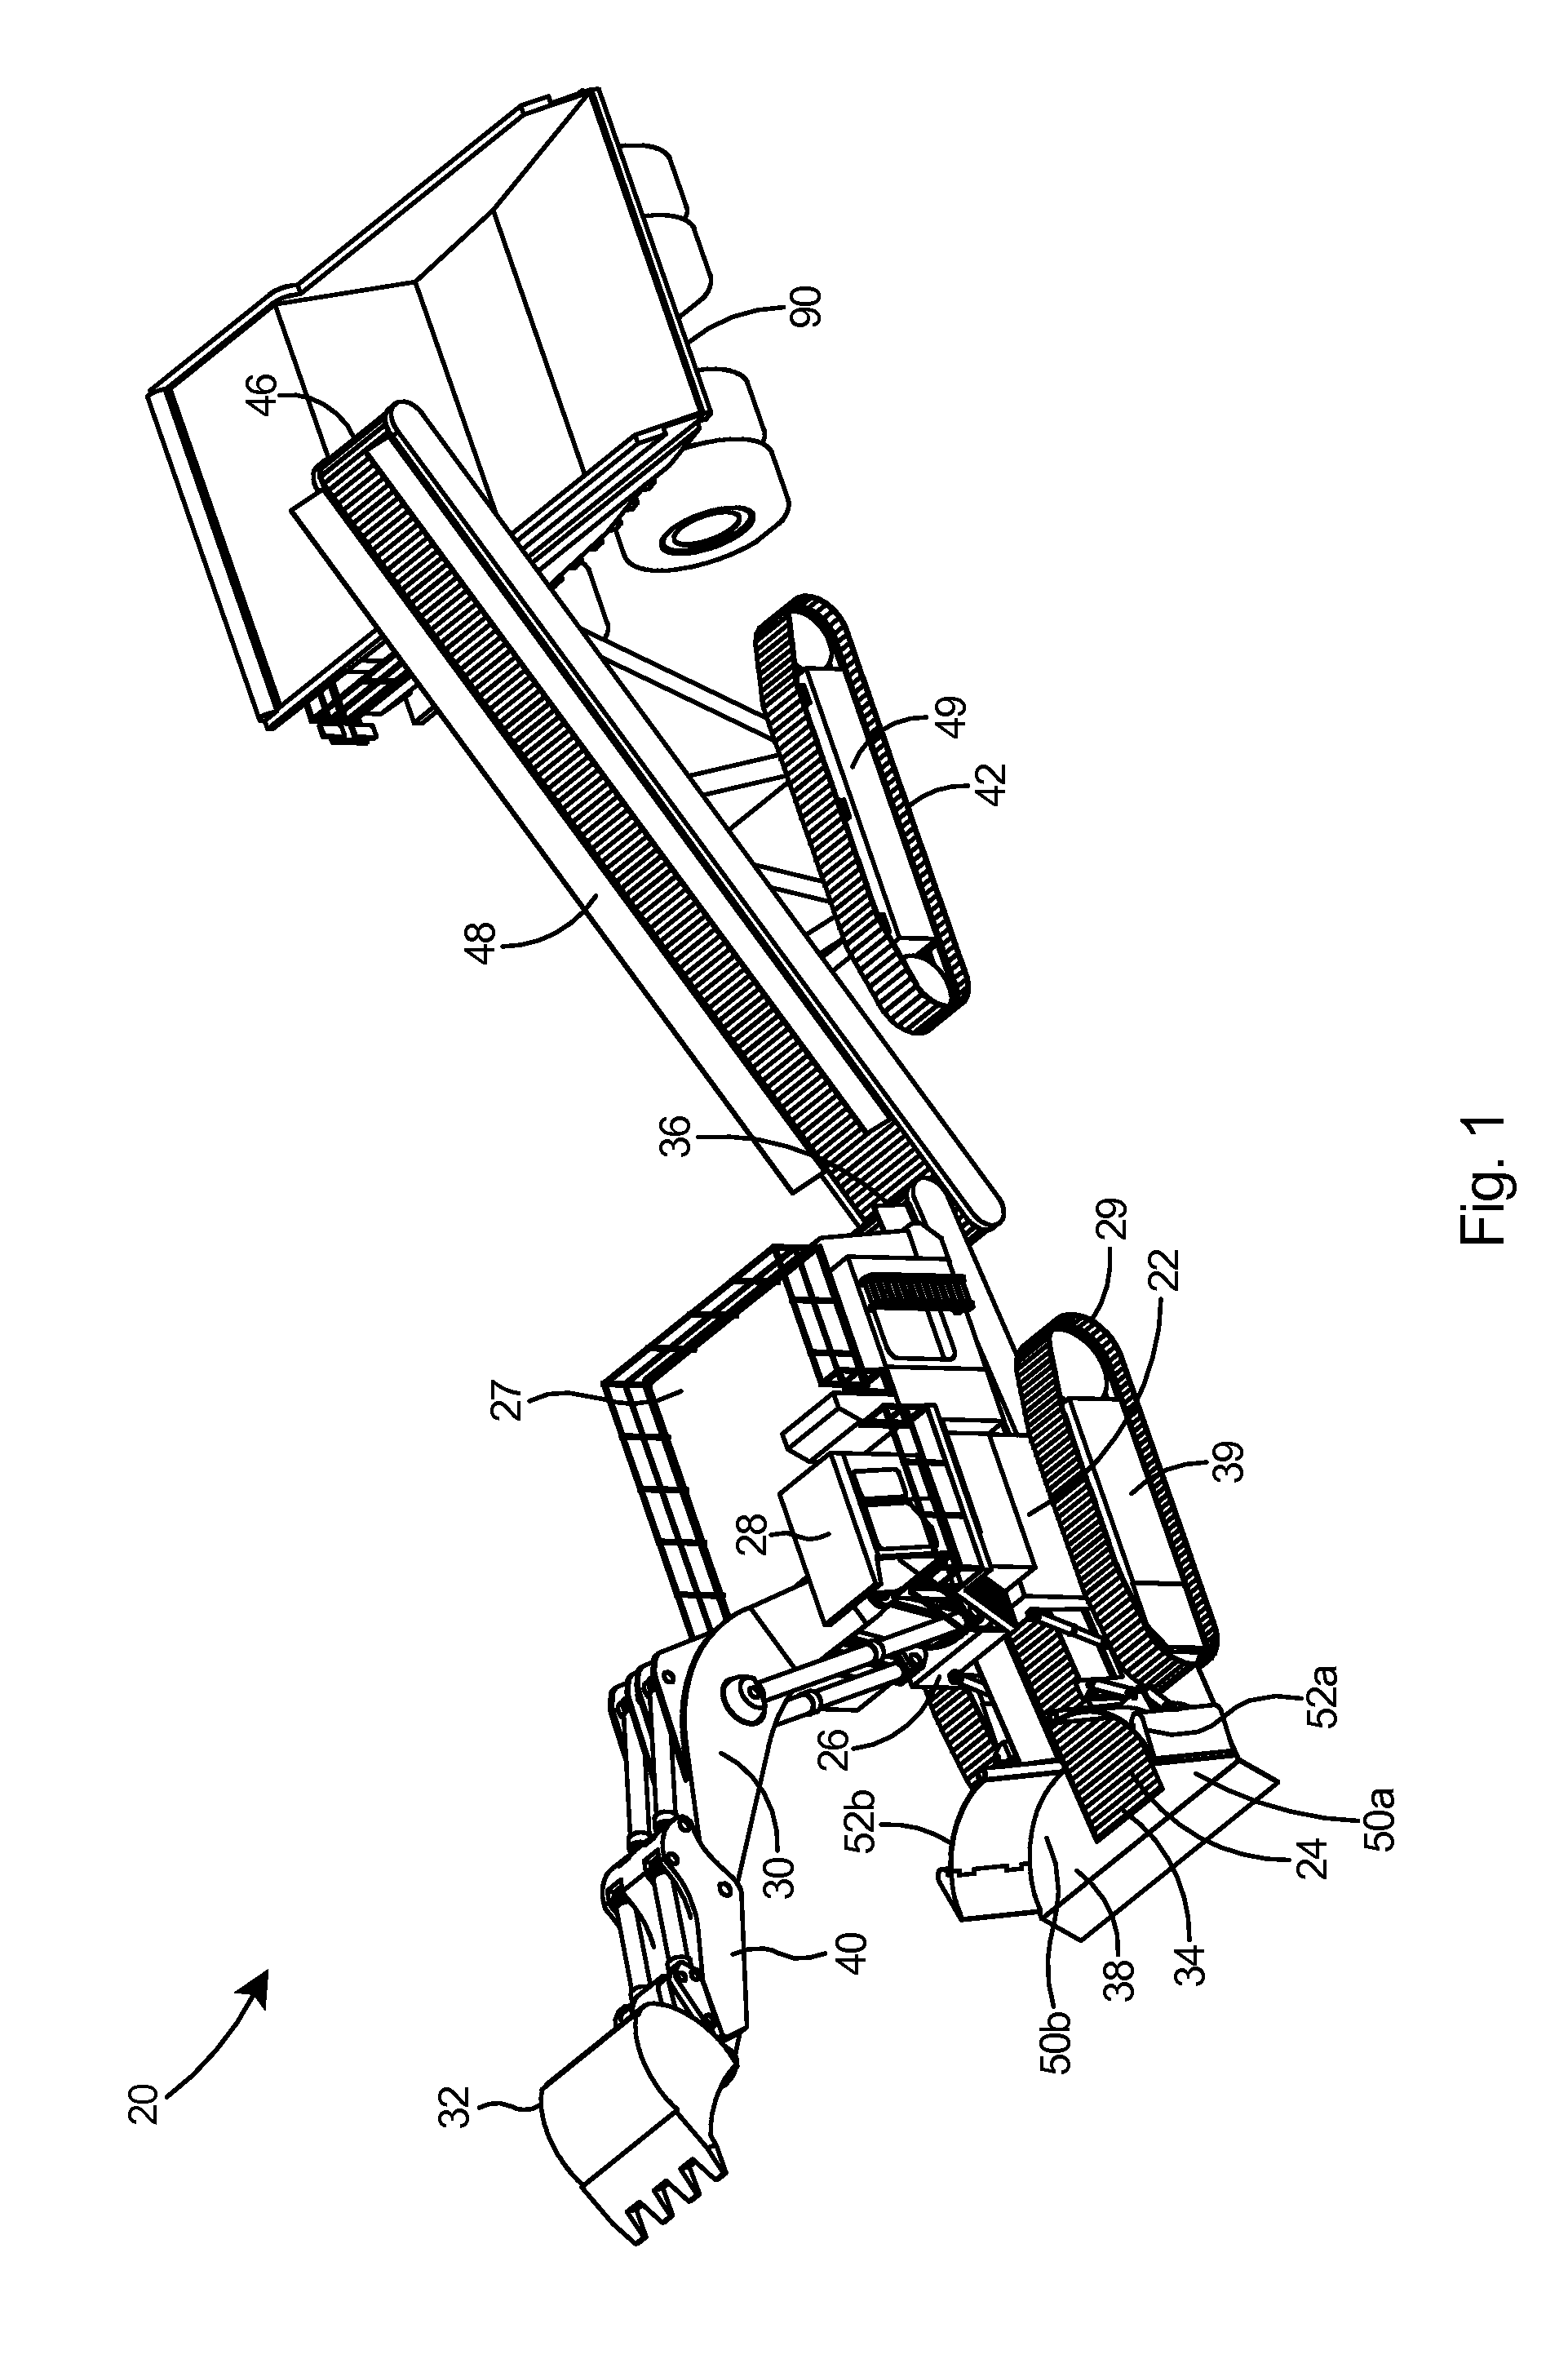 High volume loading and stacking apparatus and method